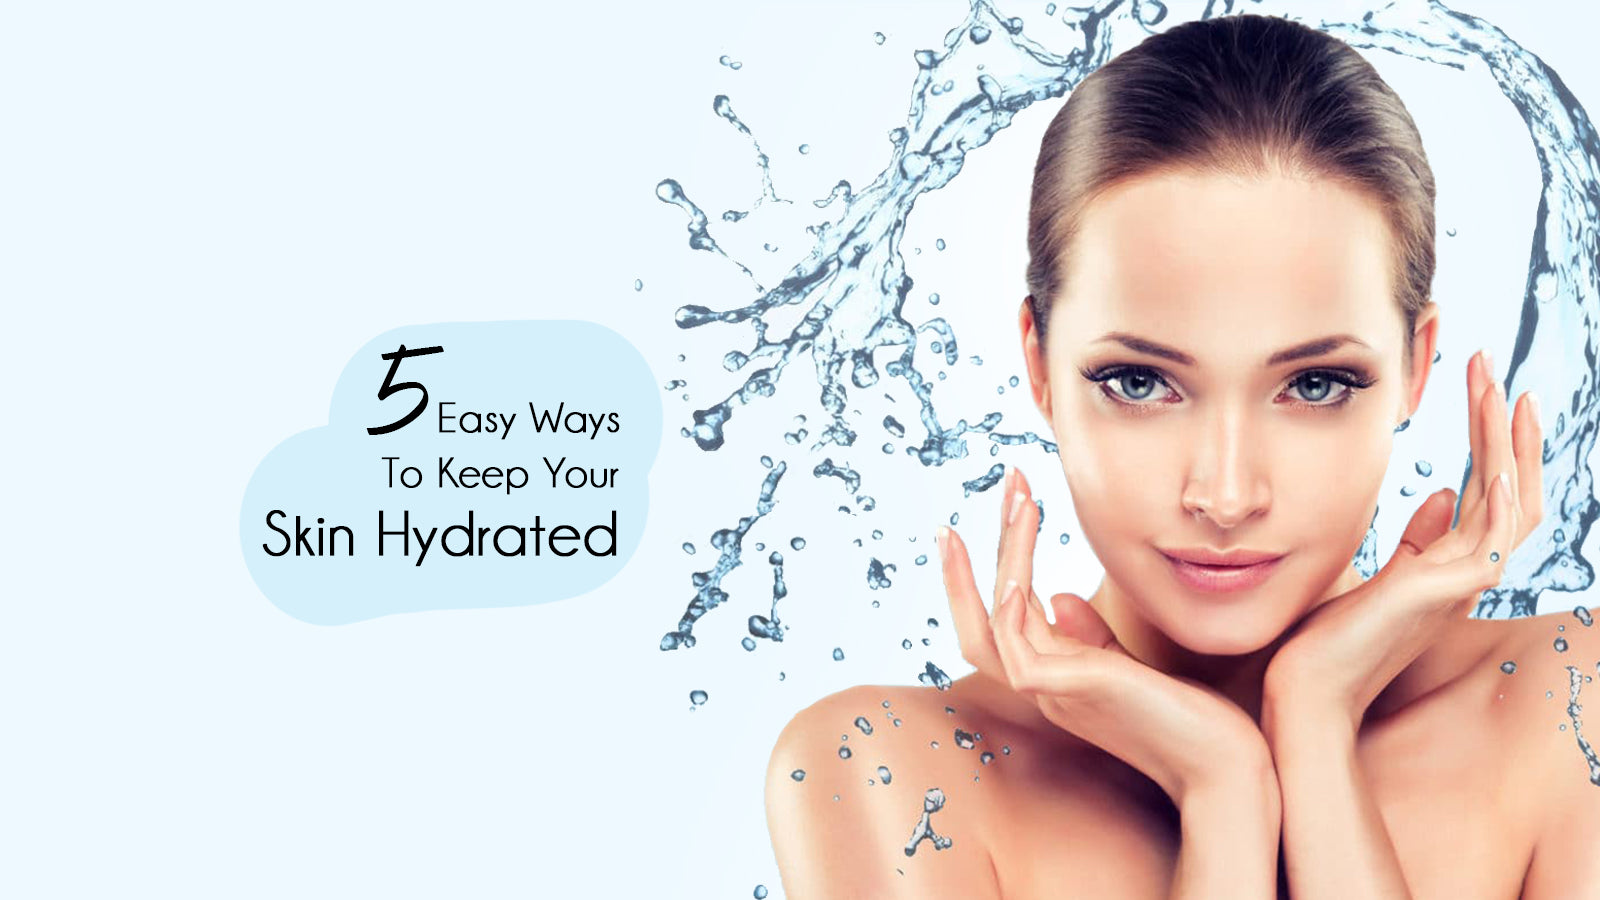 5 easy ways to keep your skin hydrated.